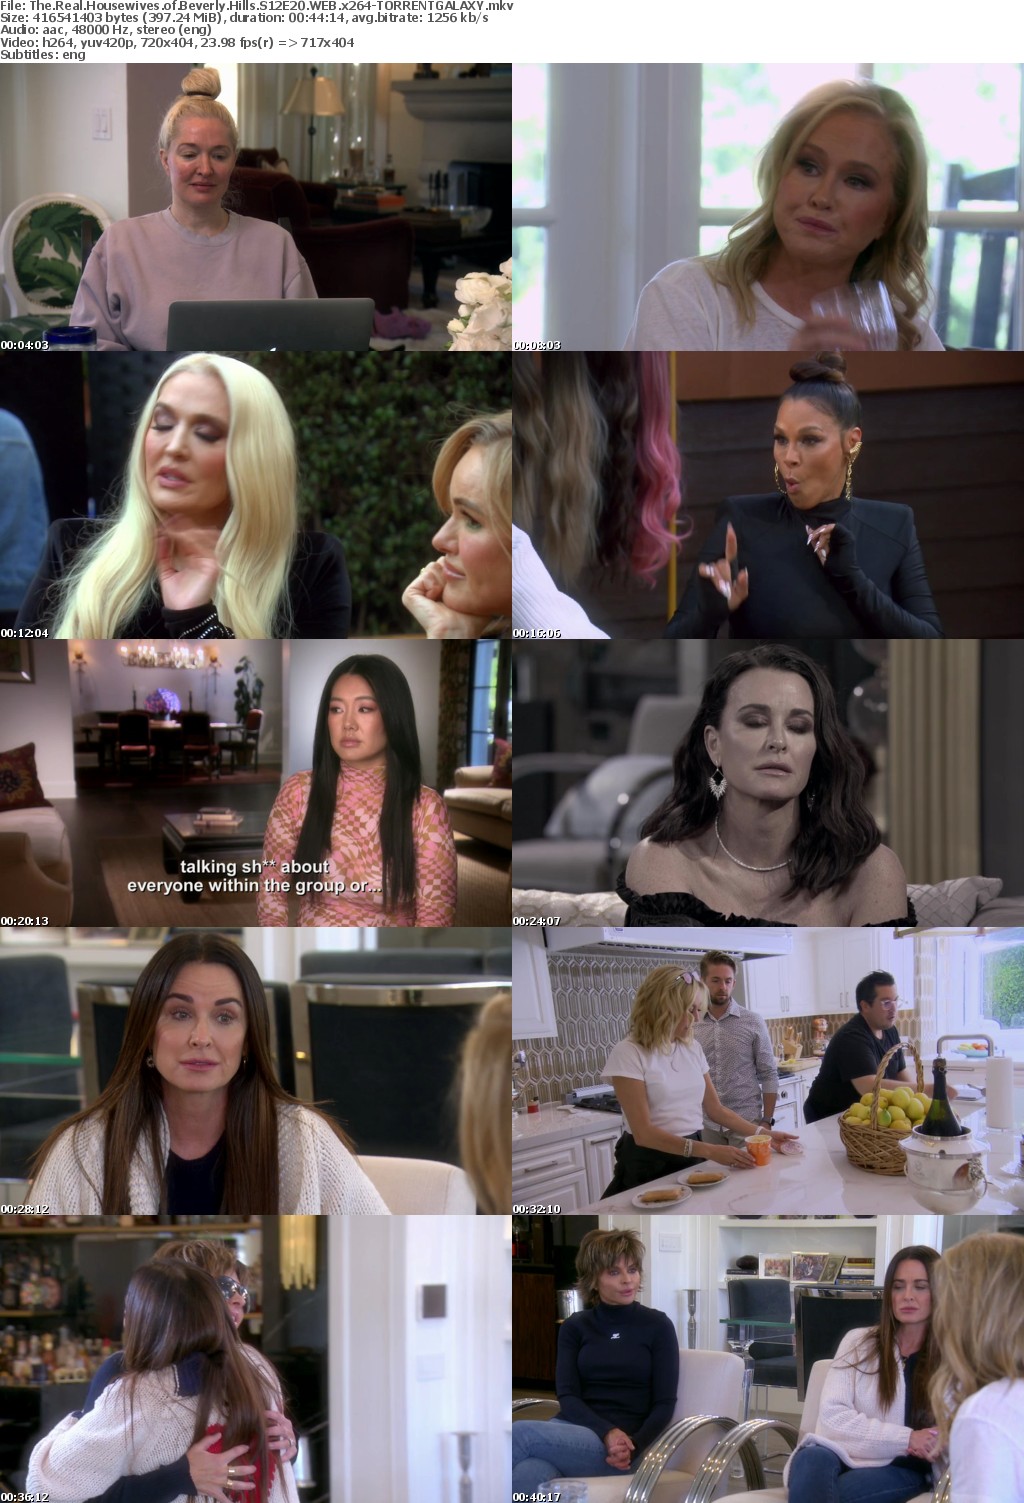 The Real Housewives of Beverly Hills S12E20 WEB x264-GALAXY